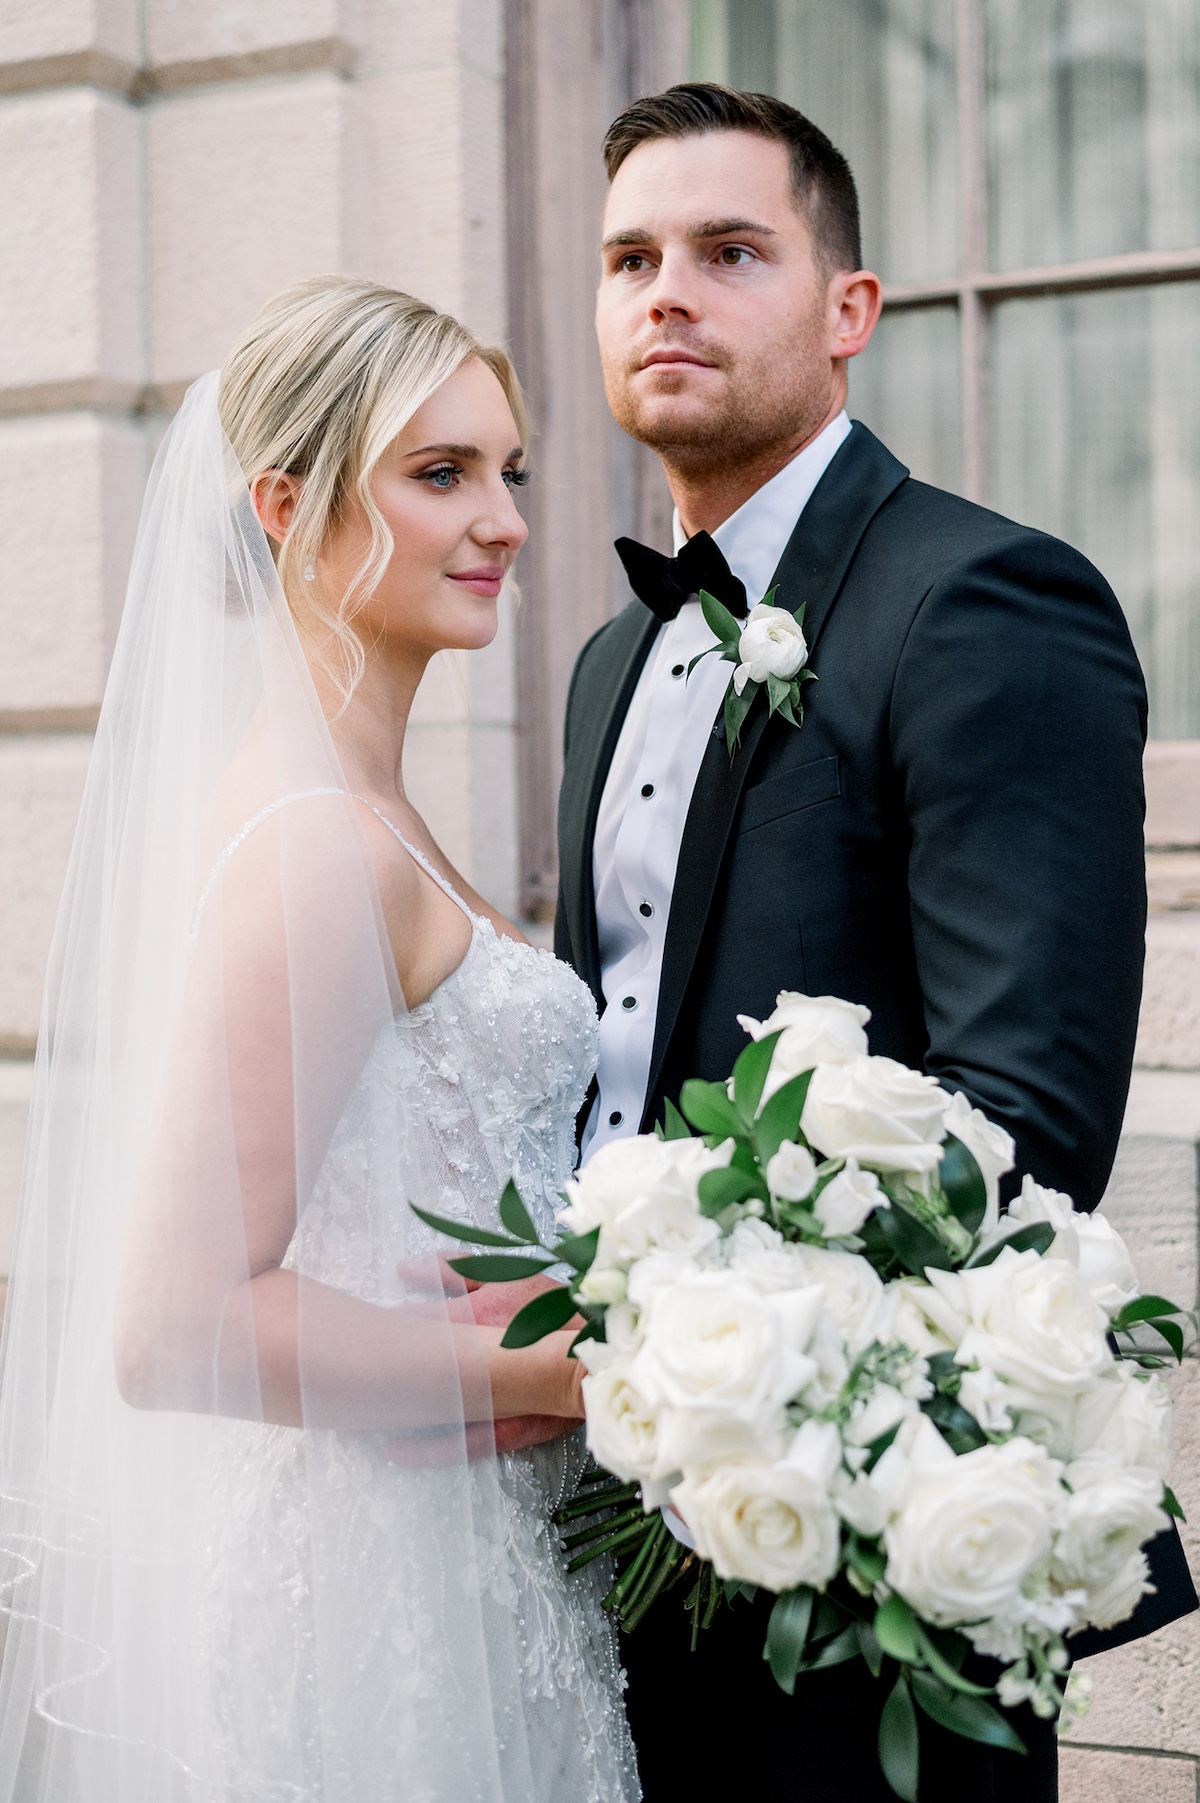 Classic editorial portrait in Lancaster City, the bride and groom embrace on its historic streets, exuding timeless romance and high-end charm.